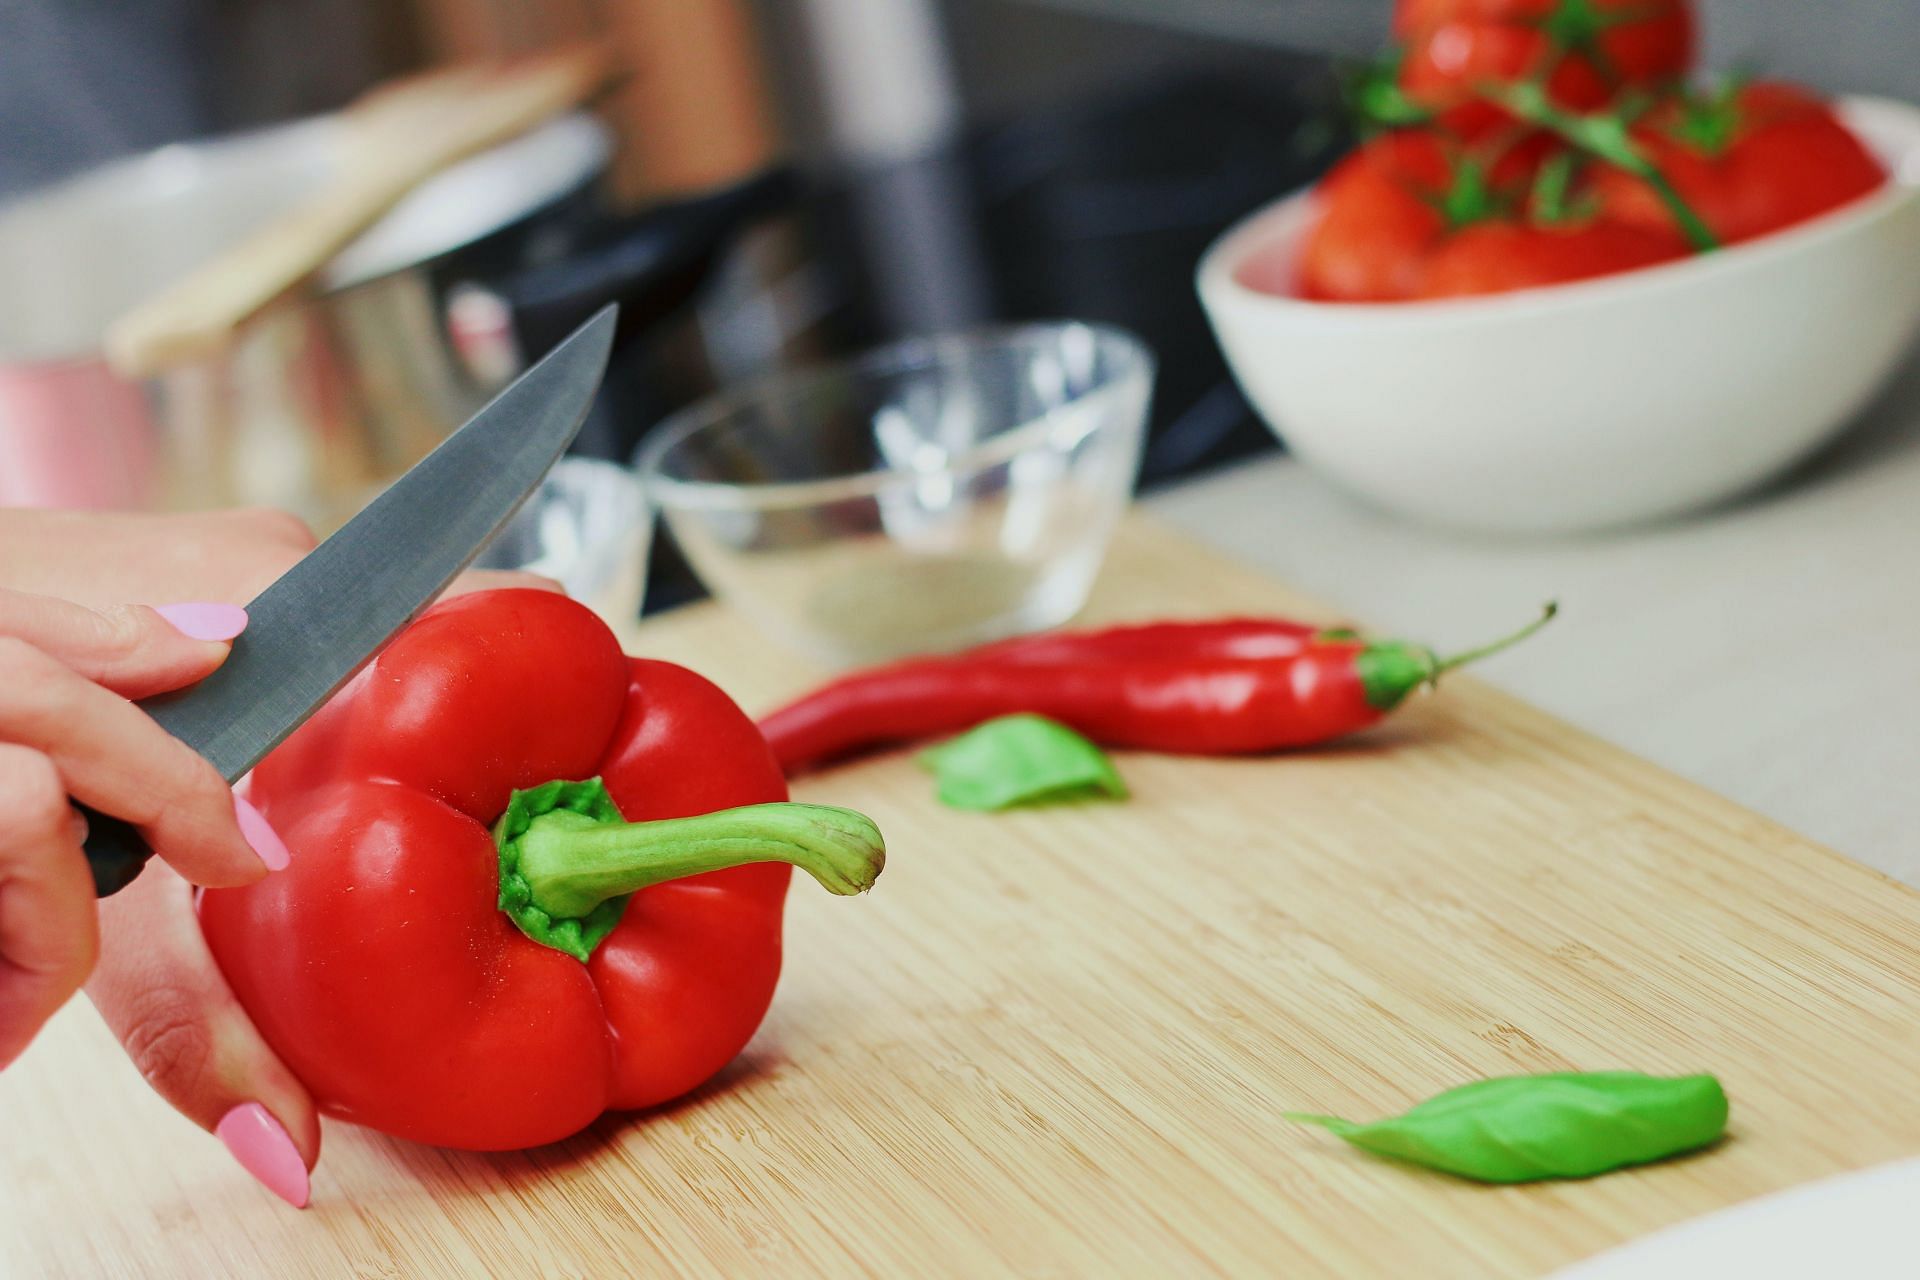 Red bell pepper benefits (image sourced via Pexels / Photo by Jeshoots)